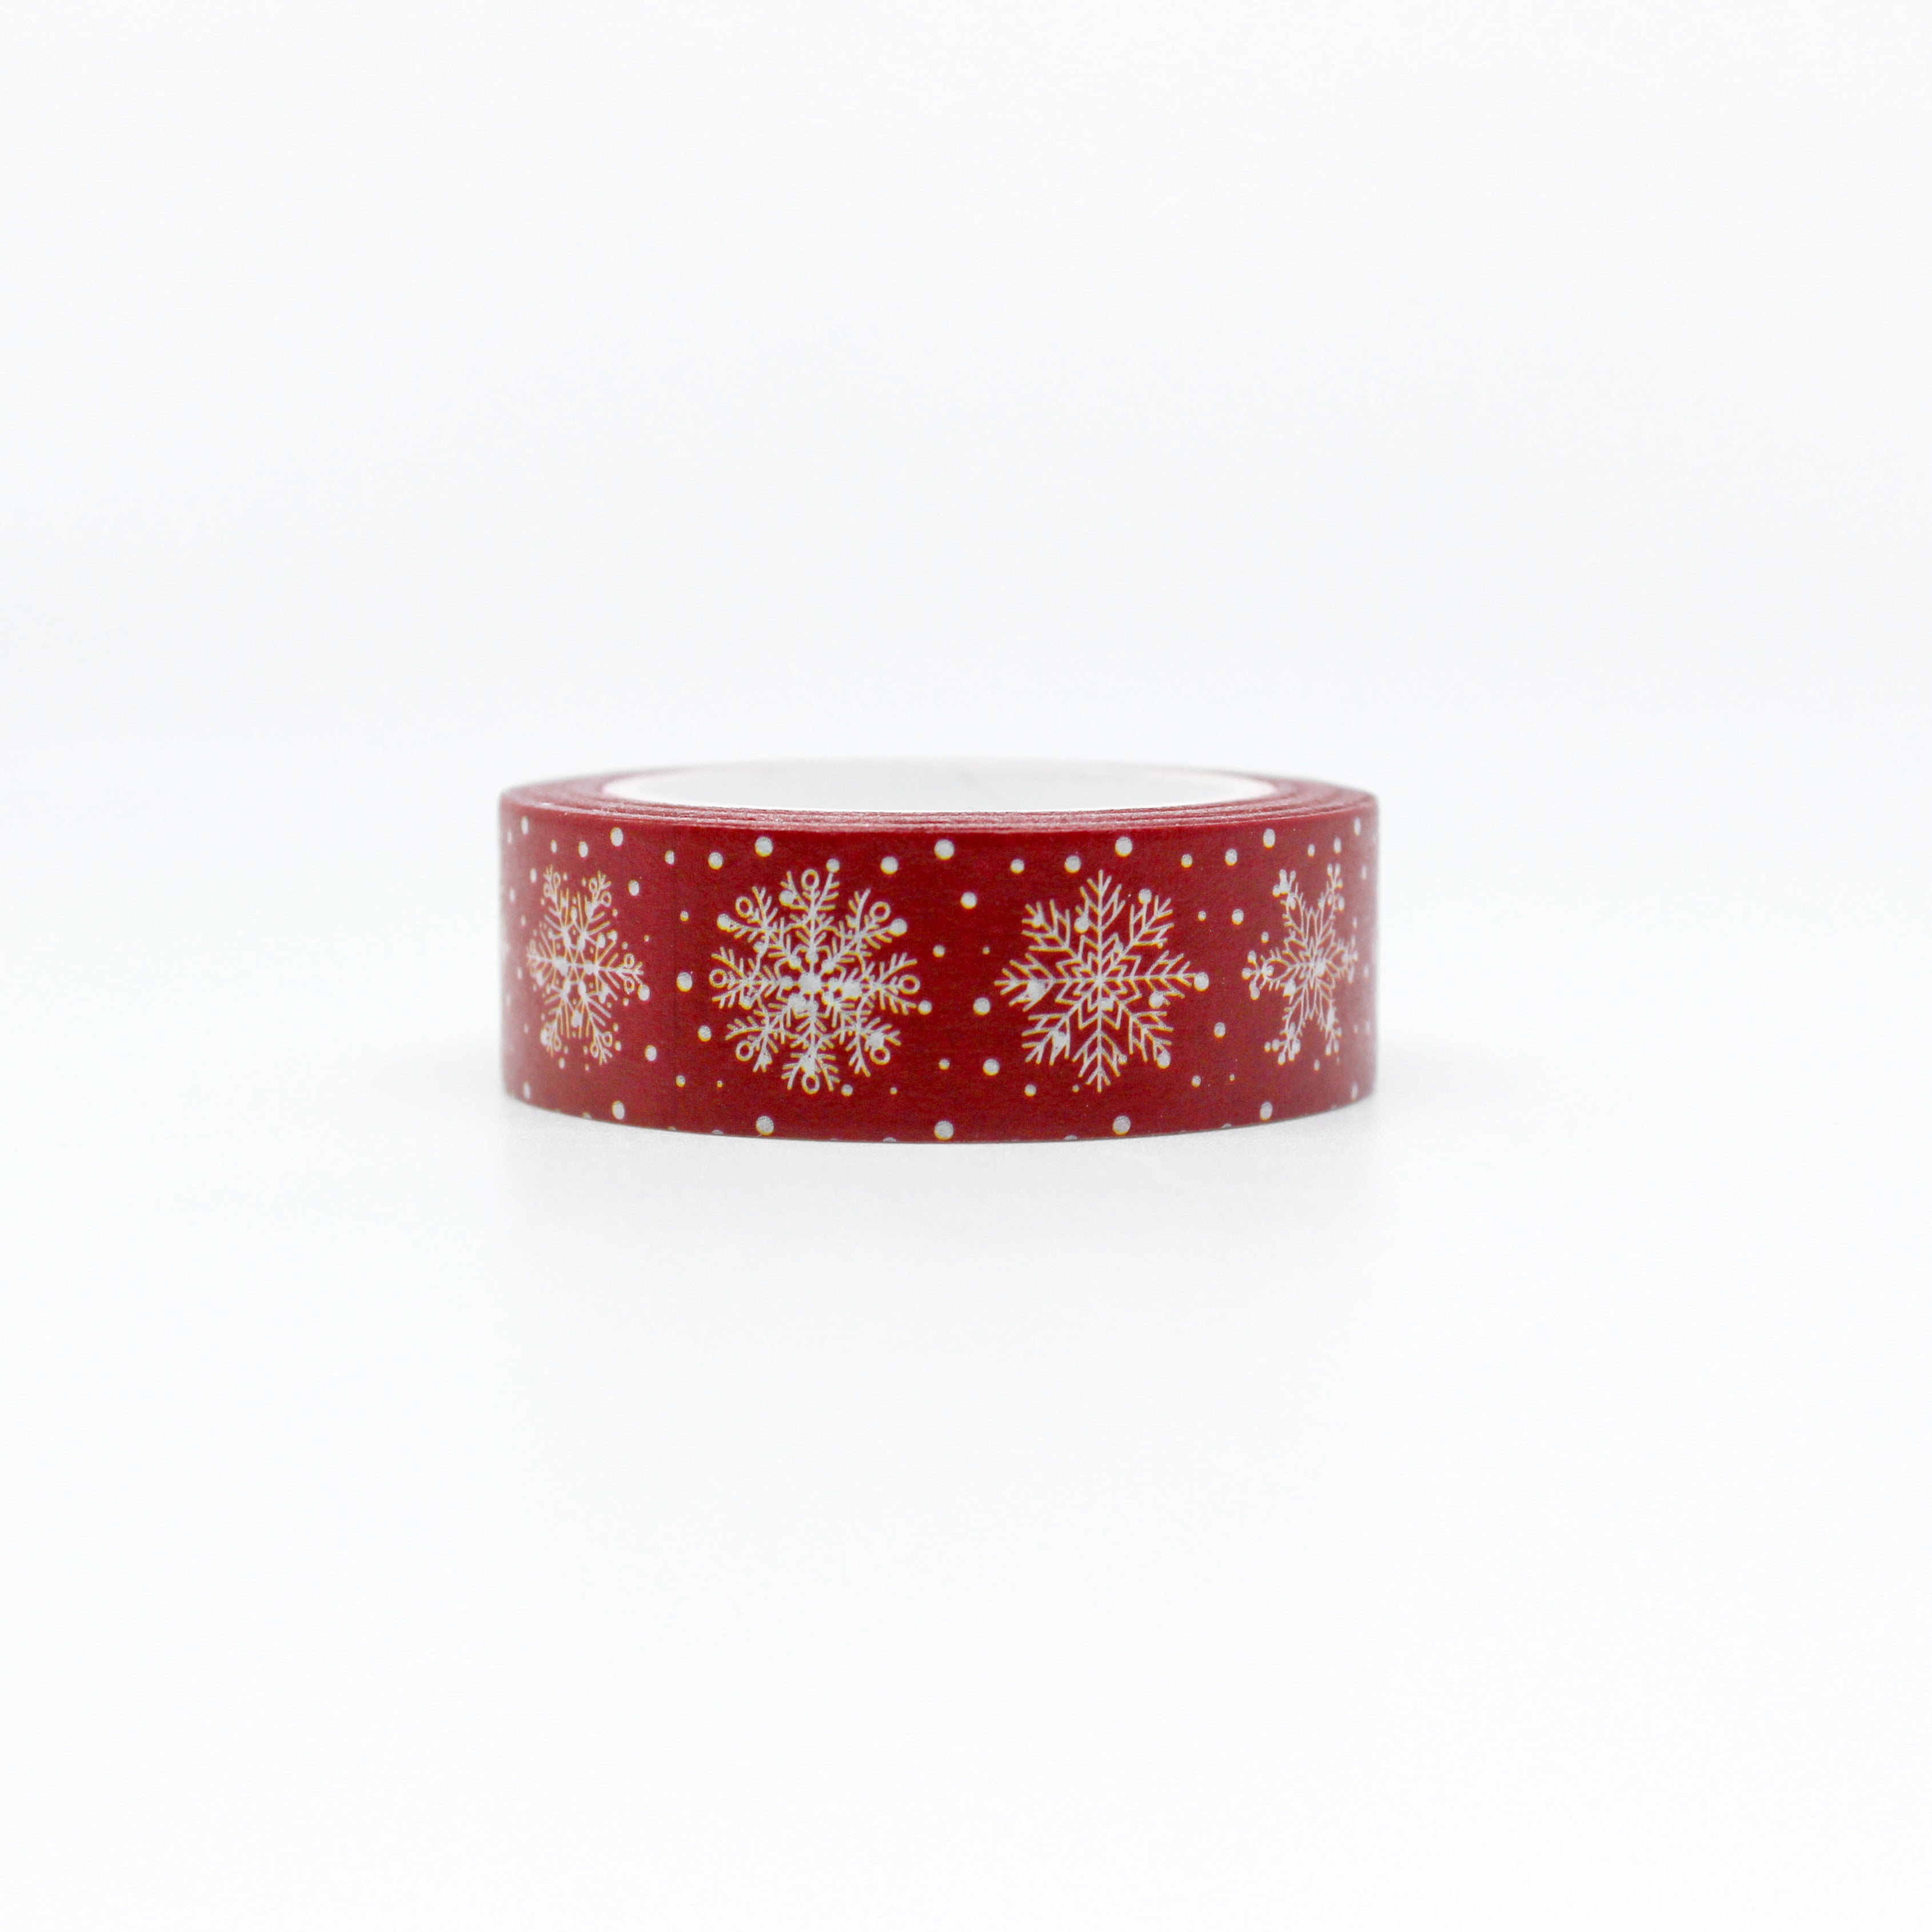 This is a Holiday Christmas dark red snowflake washi tapes from BBB Supplies Craft Shop